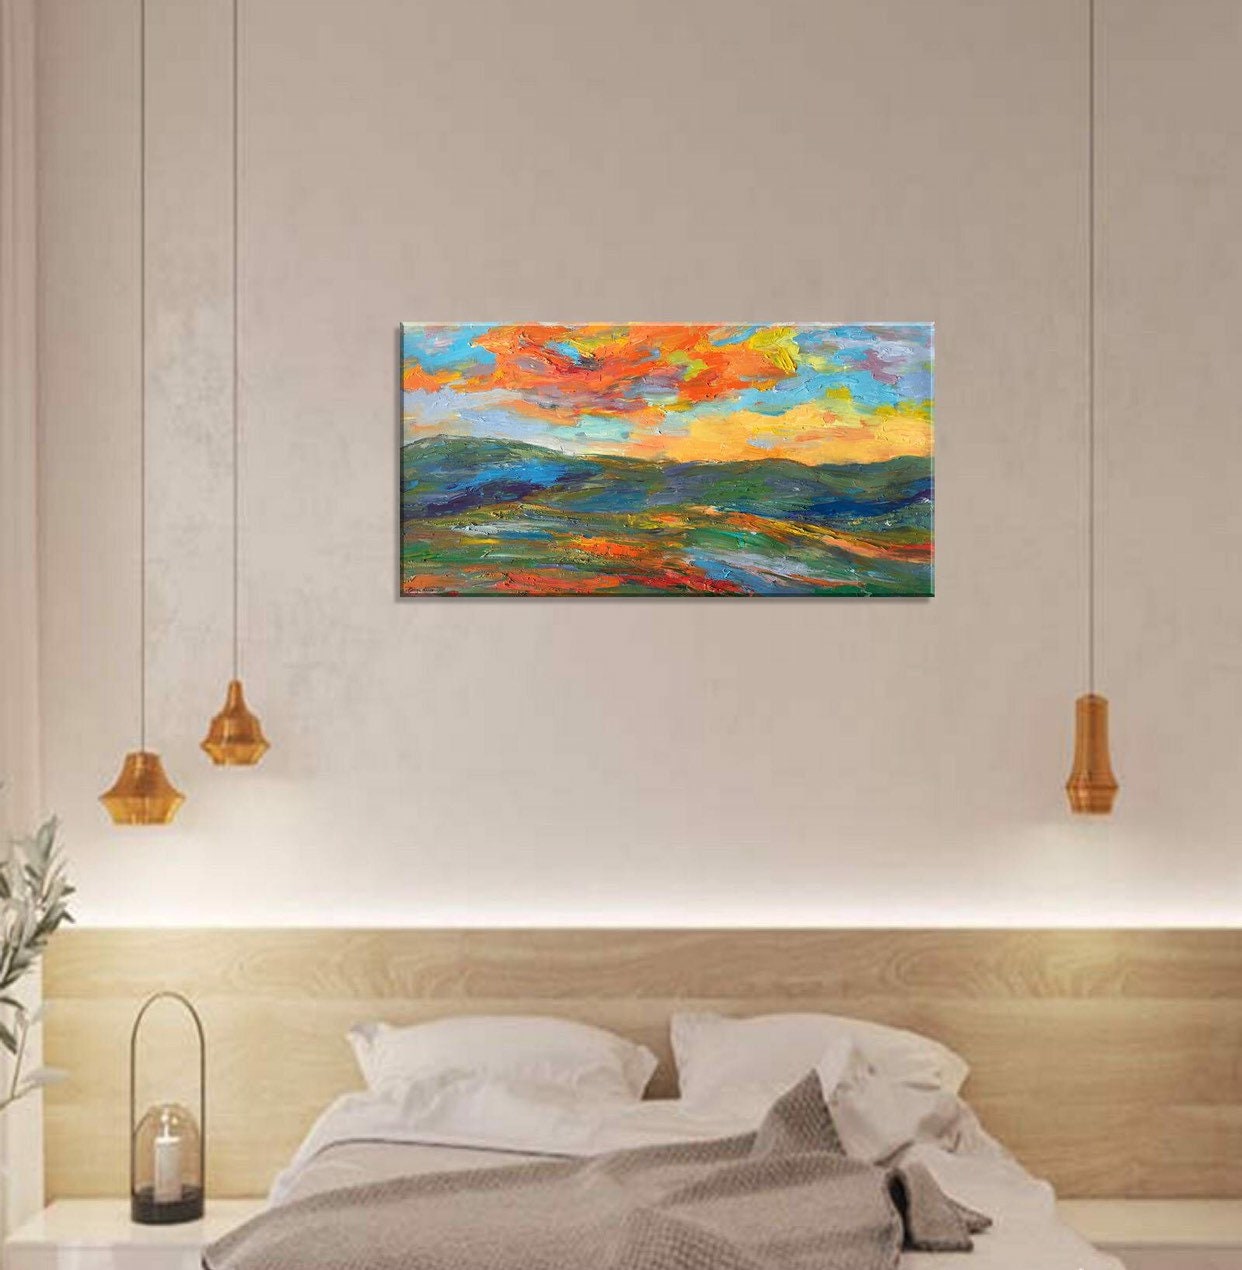 Original Abstract Landcape Painting, Canvas Painting, Wall Art Painting, Landscape, Extra Large Painting, Handmade Painting, Rustic Painting